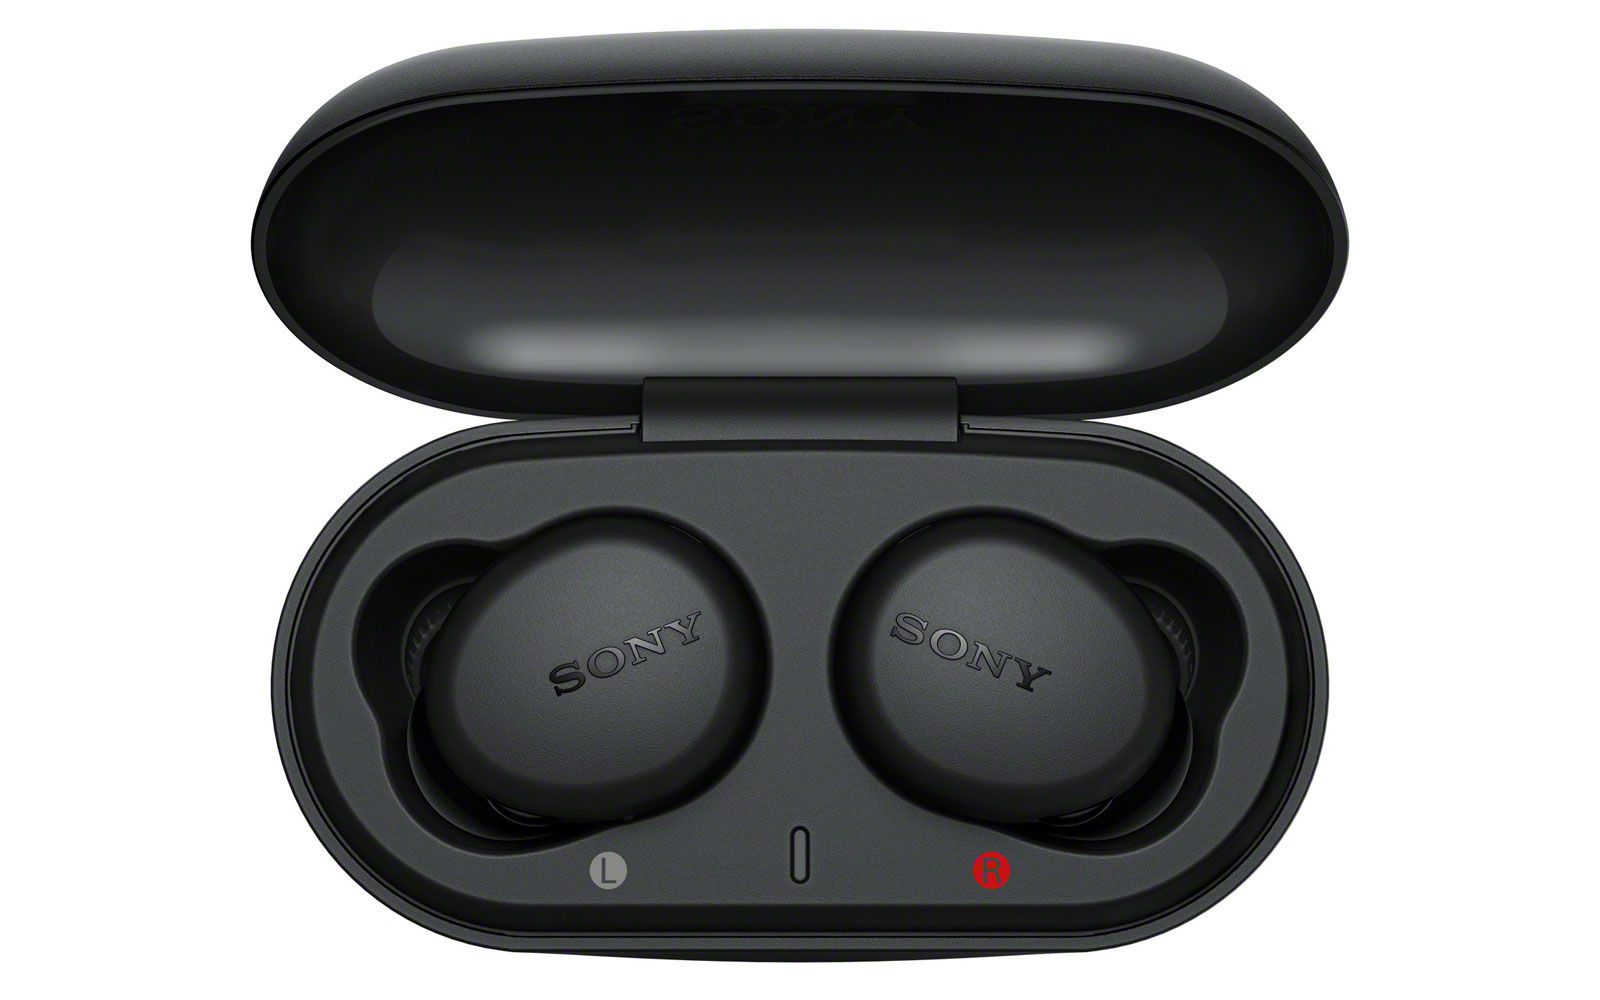 Sony’s latest true wireless earbuds have more bass and a lower price